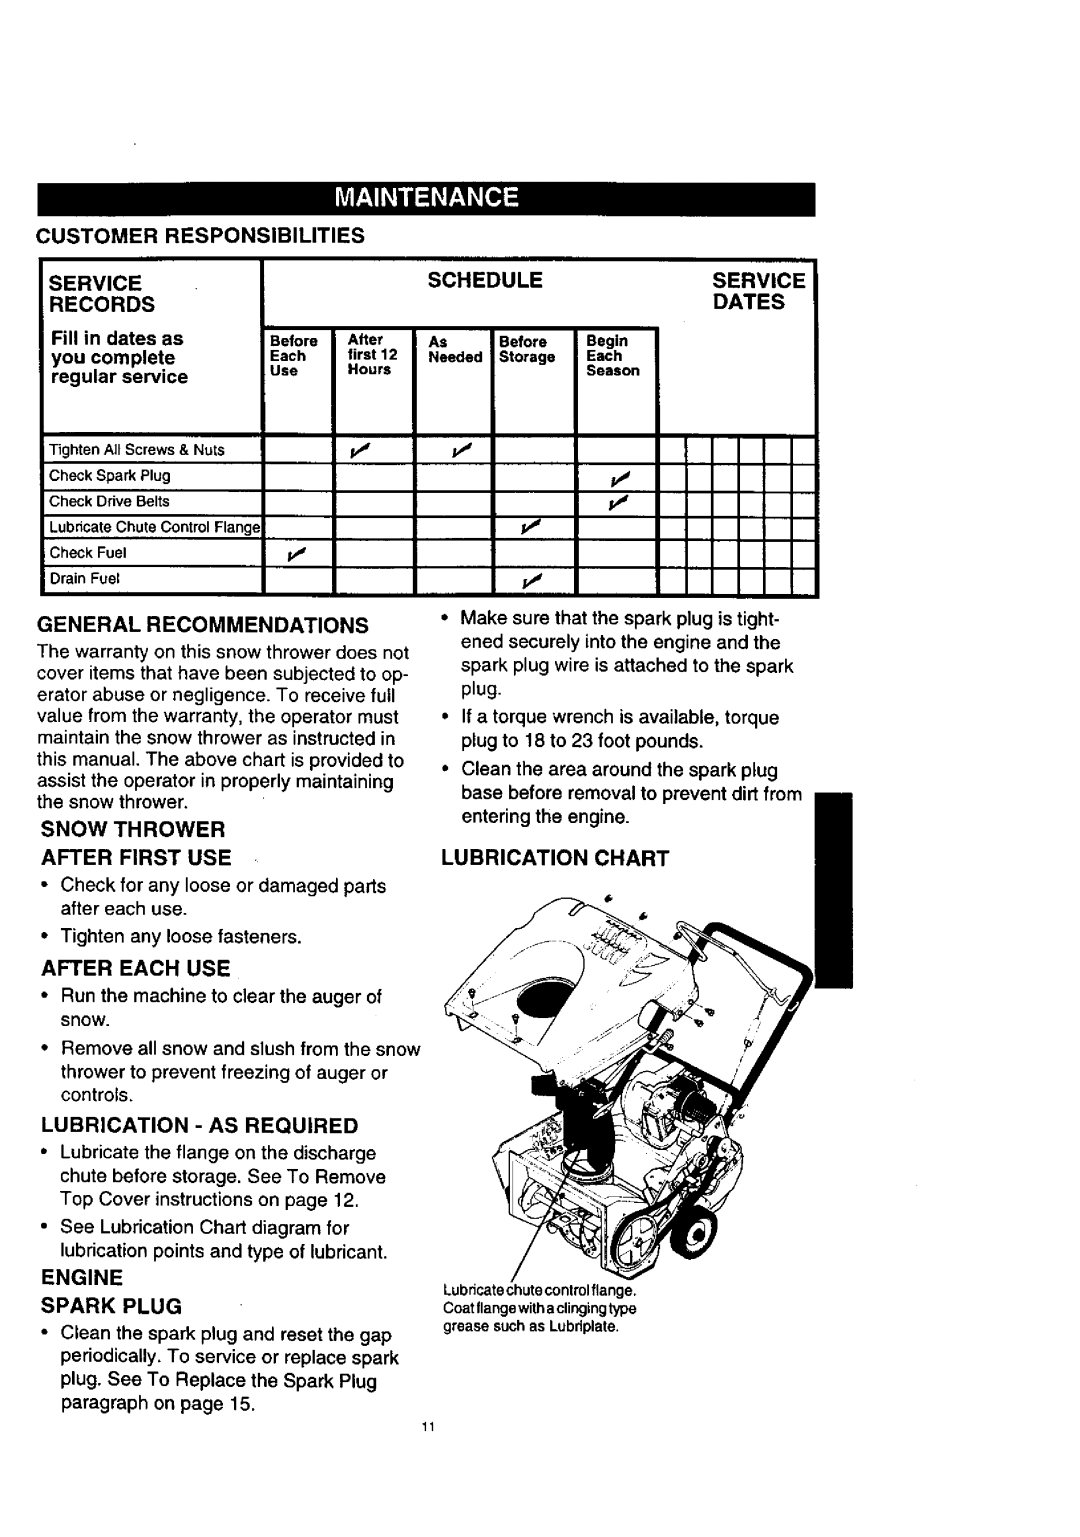 Craftsman 536.88521 Customer Responsibilities Service, Records, Lubrication Chart Lubrication AS Required, Spark Plug 